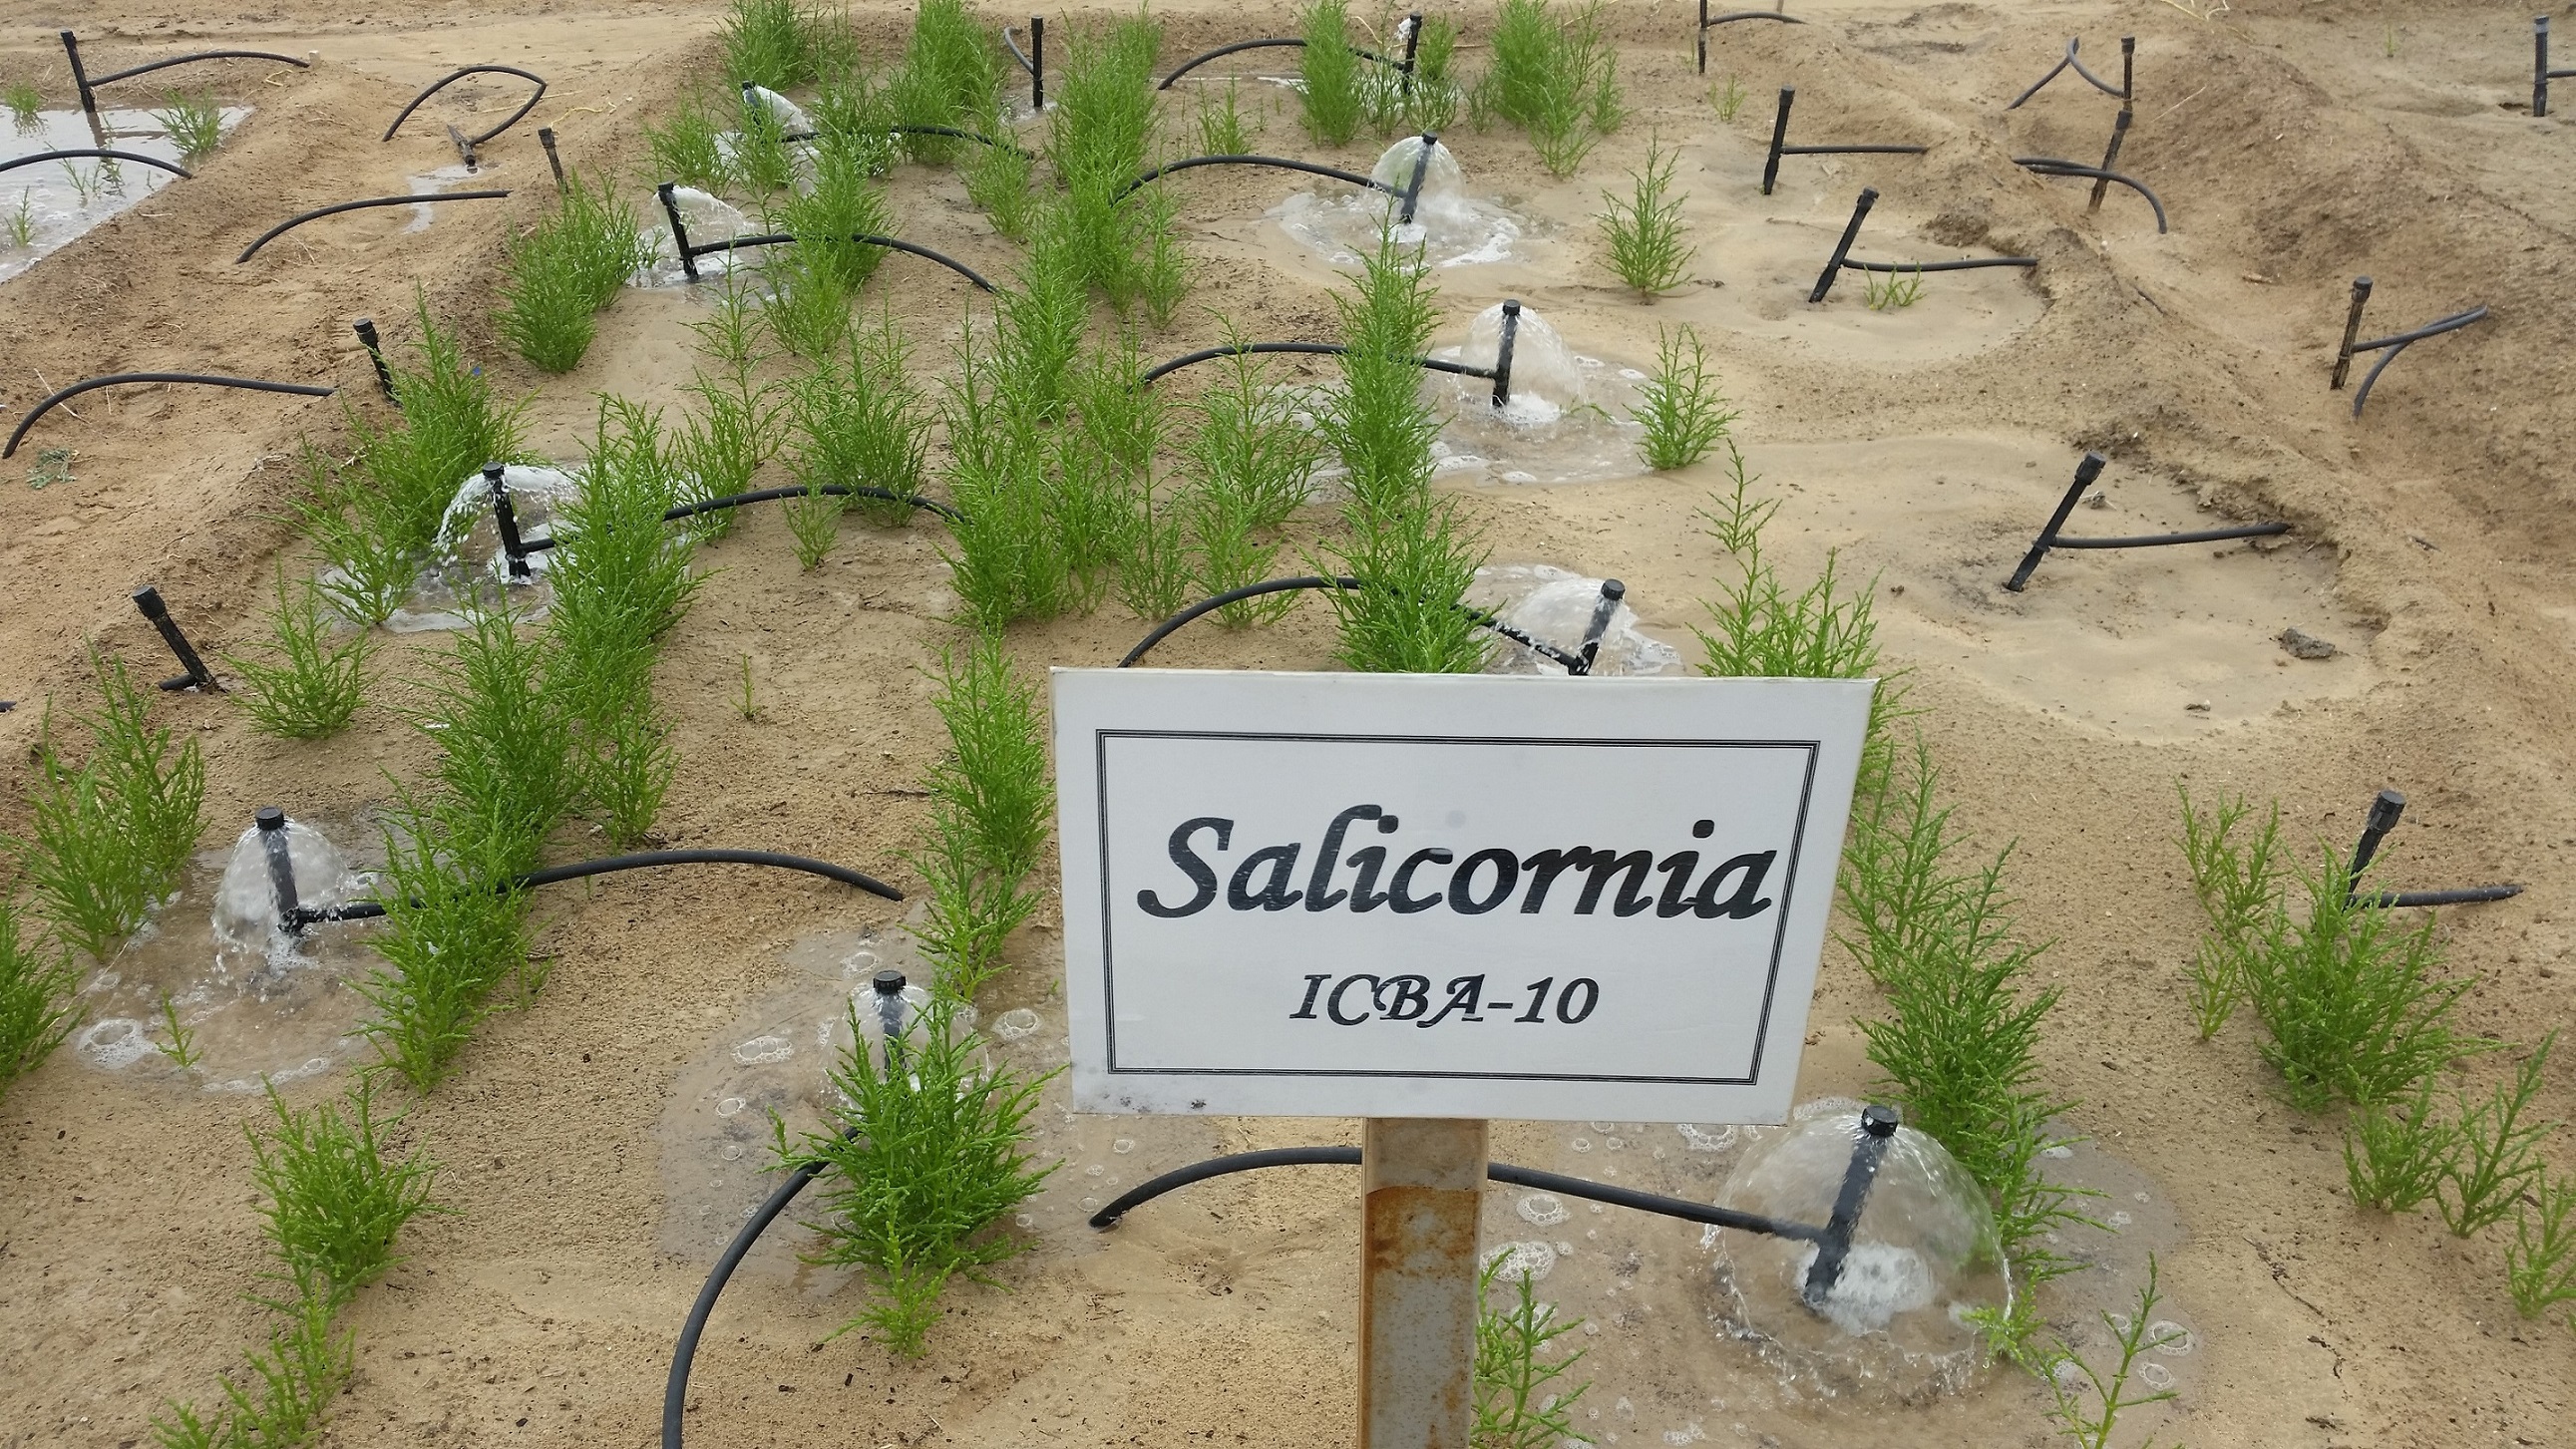 Salicornia is a halophyte that can be used as a vegetable and as forage. Photo: ICBA